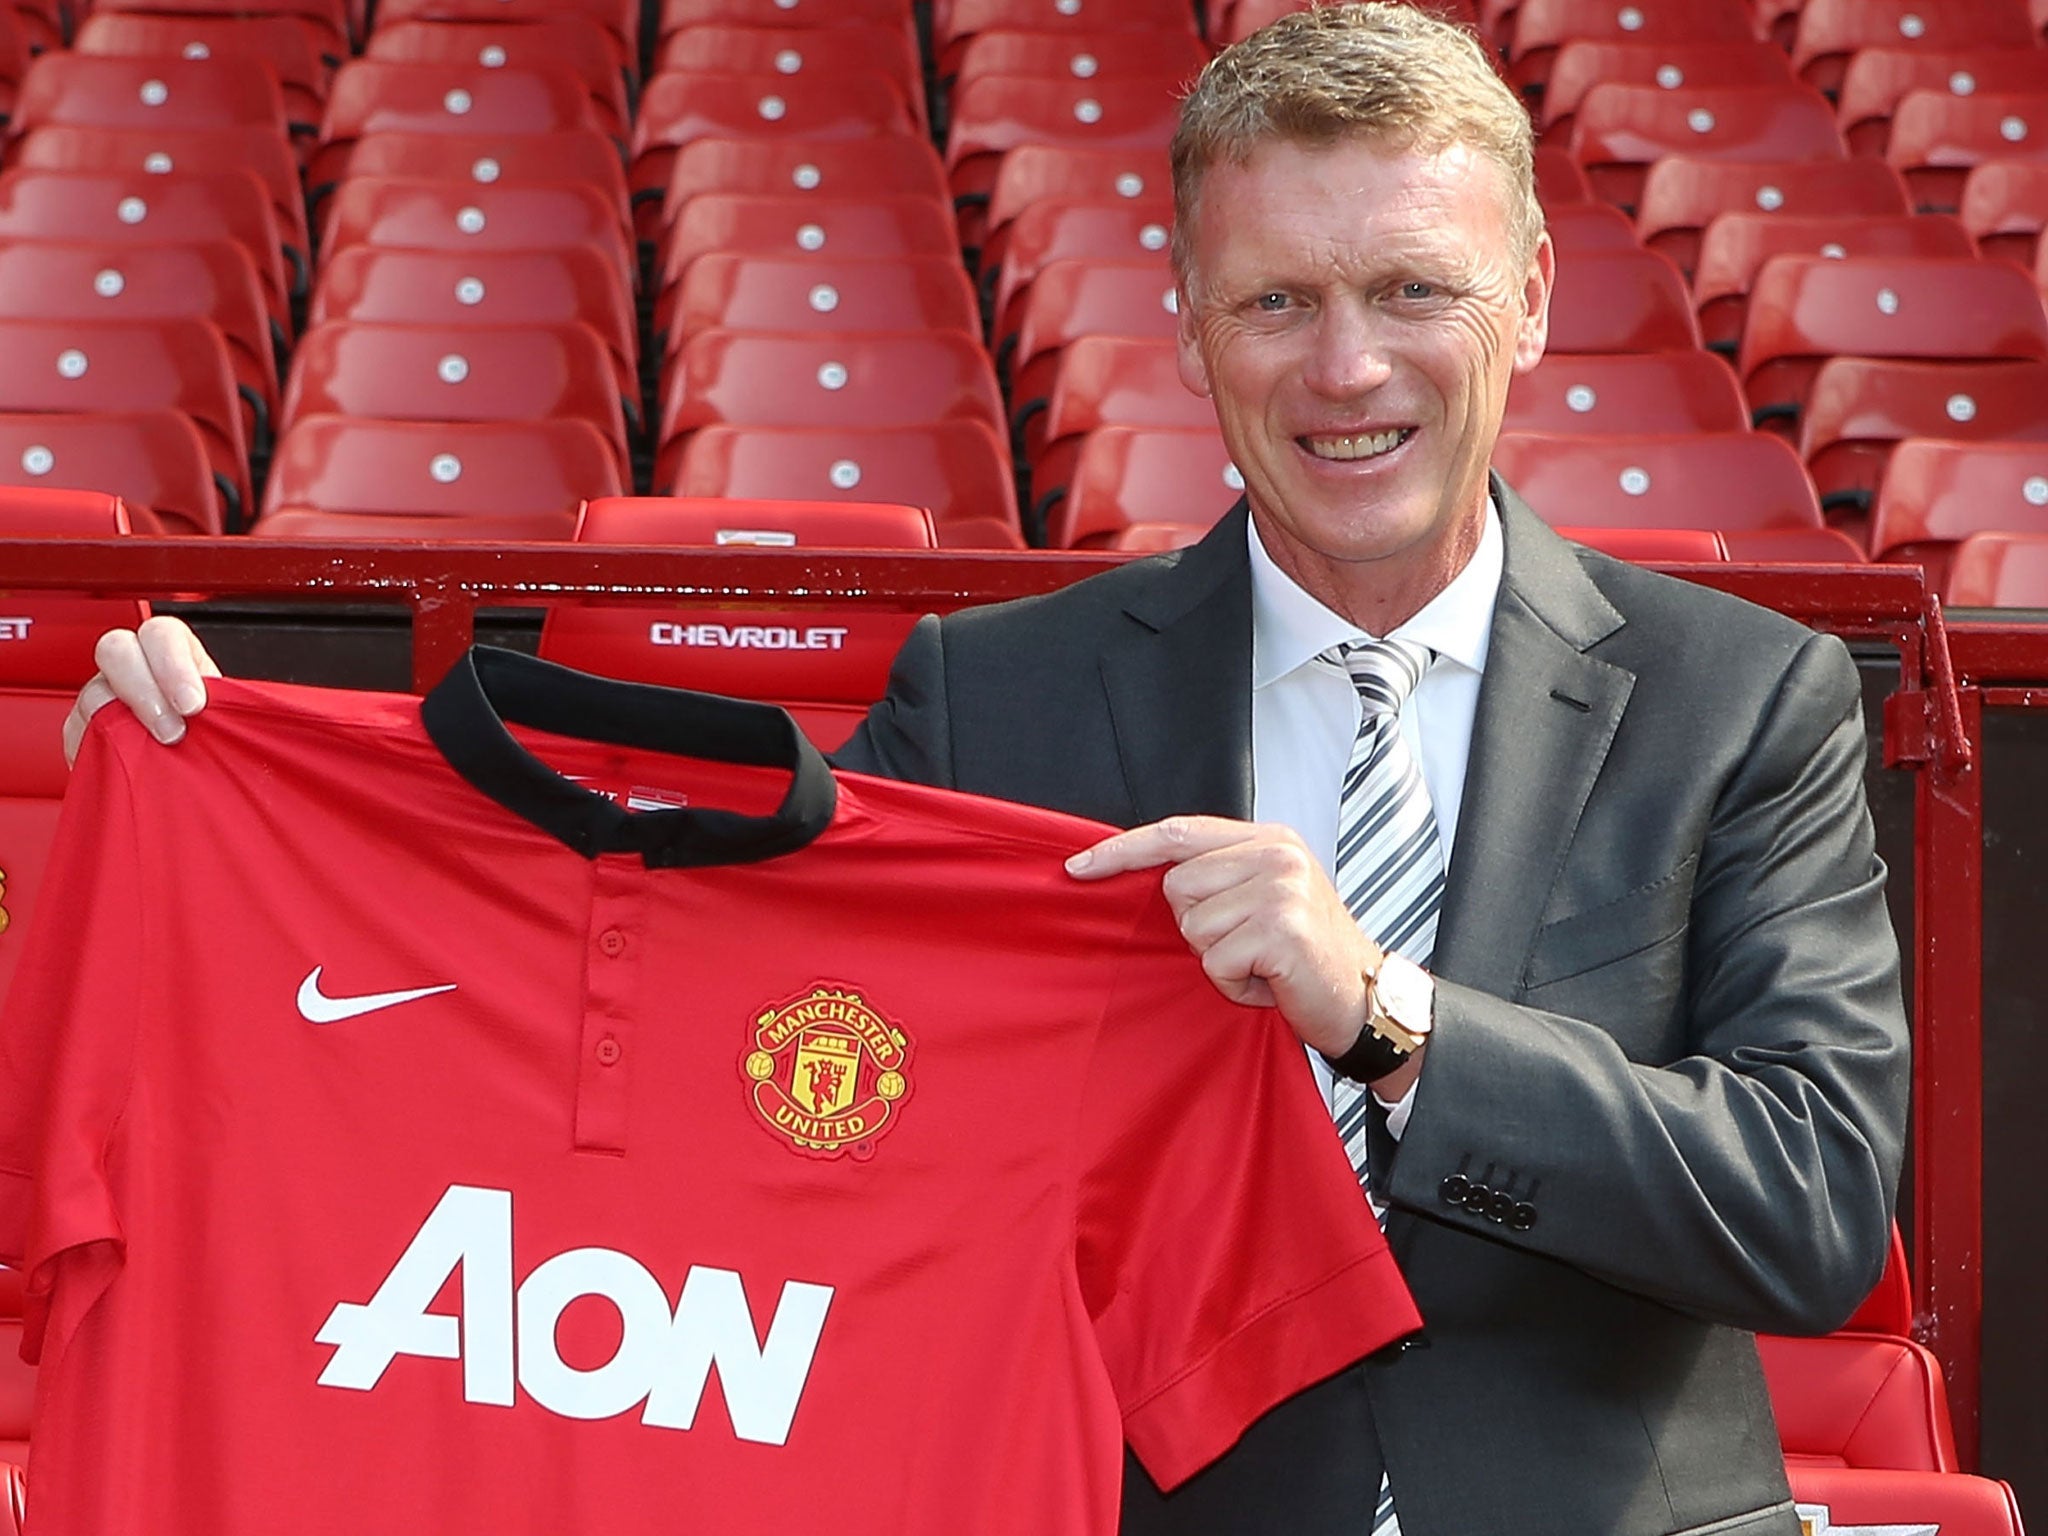 David Moyes has few illusions that the club will show him the kind of patience they had with Sir Alex Ferguson if things go wrong